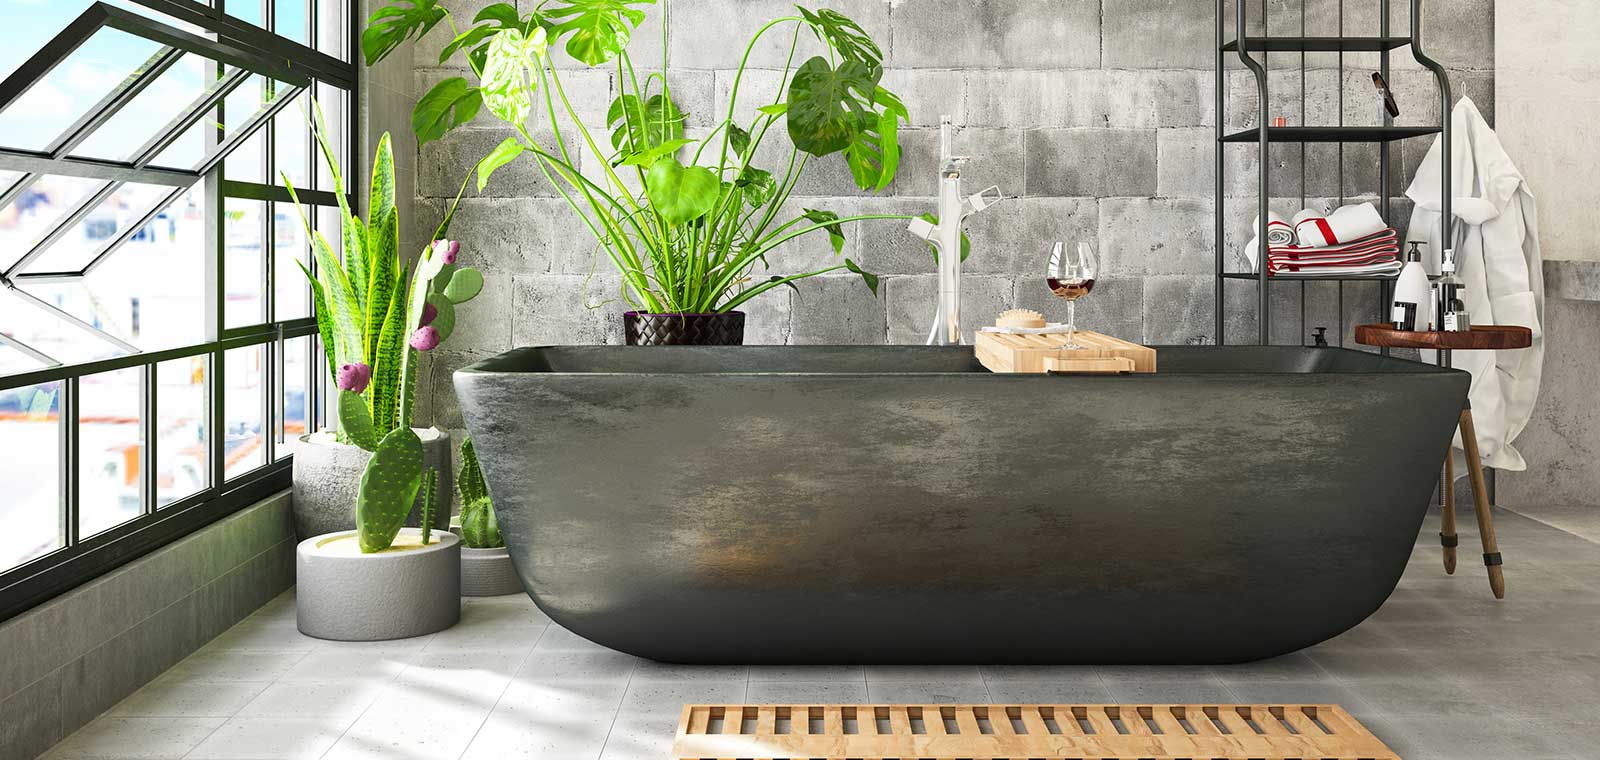 How to Create a Spa-Like Bathroom in Your Apartment